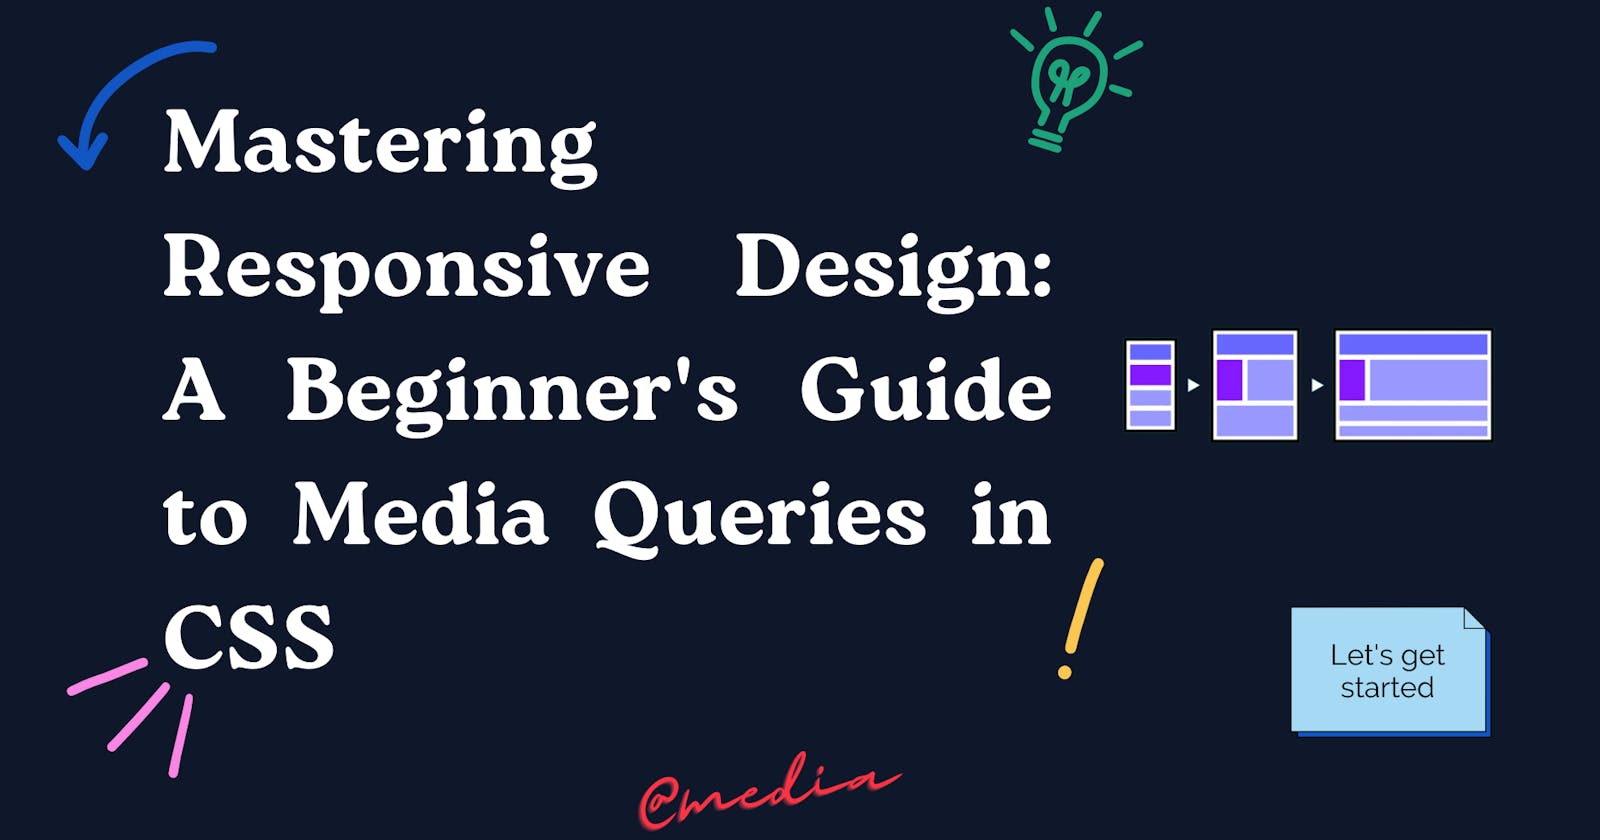 Mastering Responsive Design: A Beginner's Guide to Media Queries in CSS👨‍💻